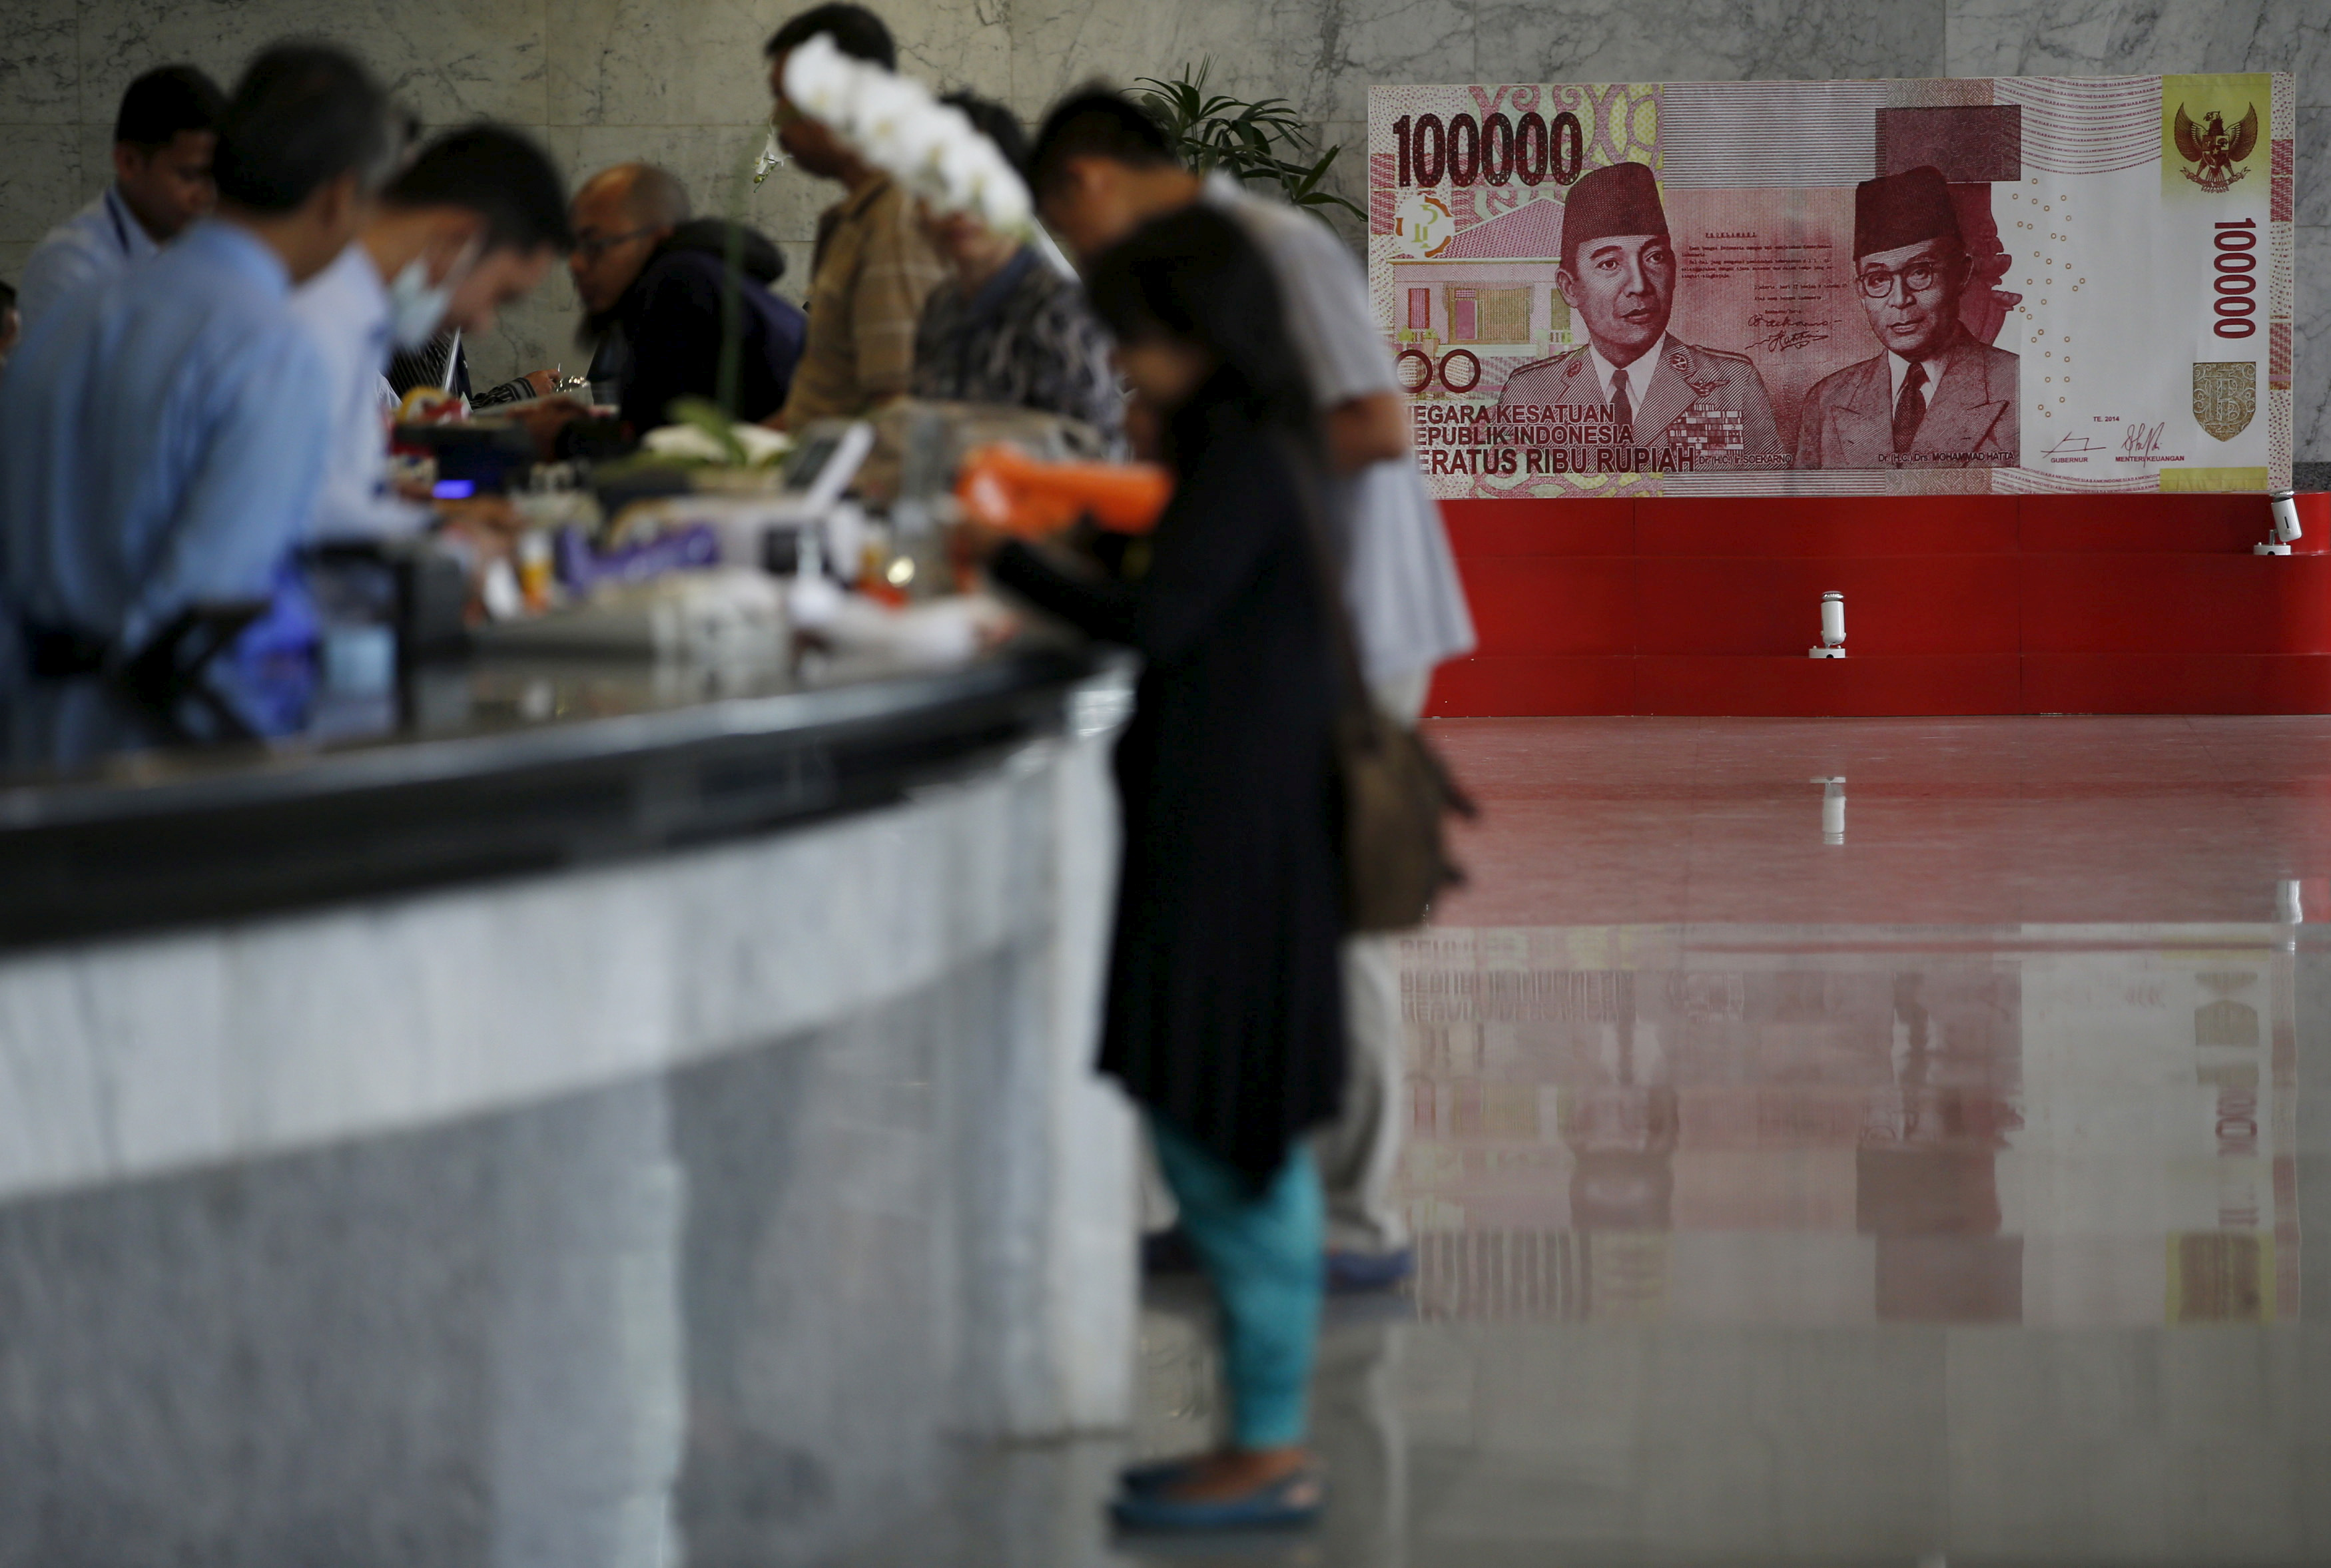 Customers are seen at a counter inside the Bank Indonesia complex in Jakarta, Indonesia, December 16, 2015.    REUTERS/Darren Whiteside/File Photo